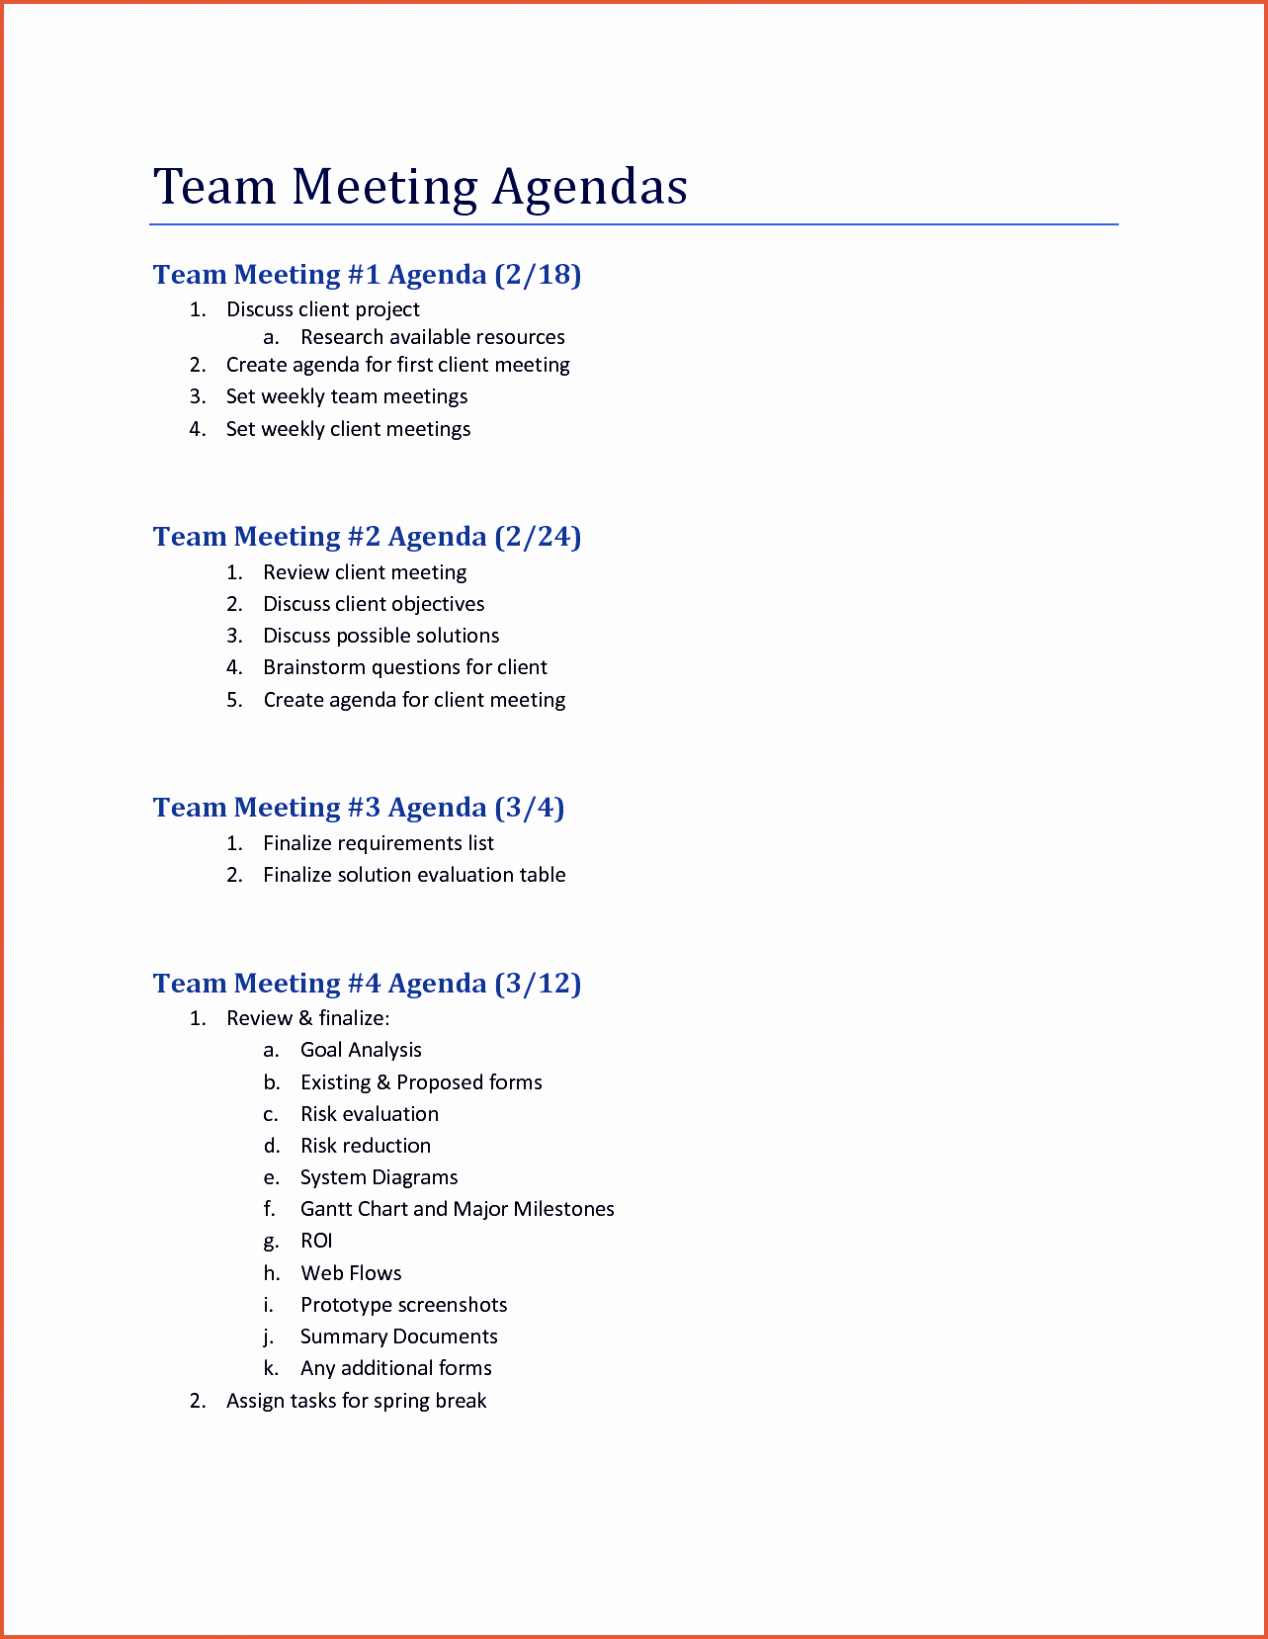 Team Meeting Agenda Template Word Awesome Staff Board &amp; Team Meeting Agenda Template Word Excel